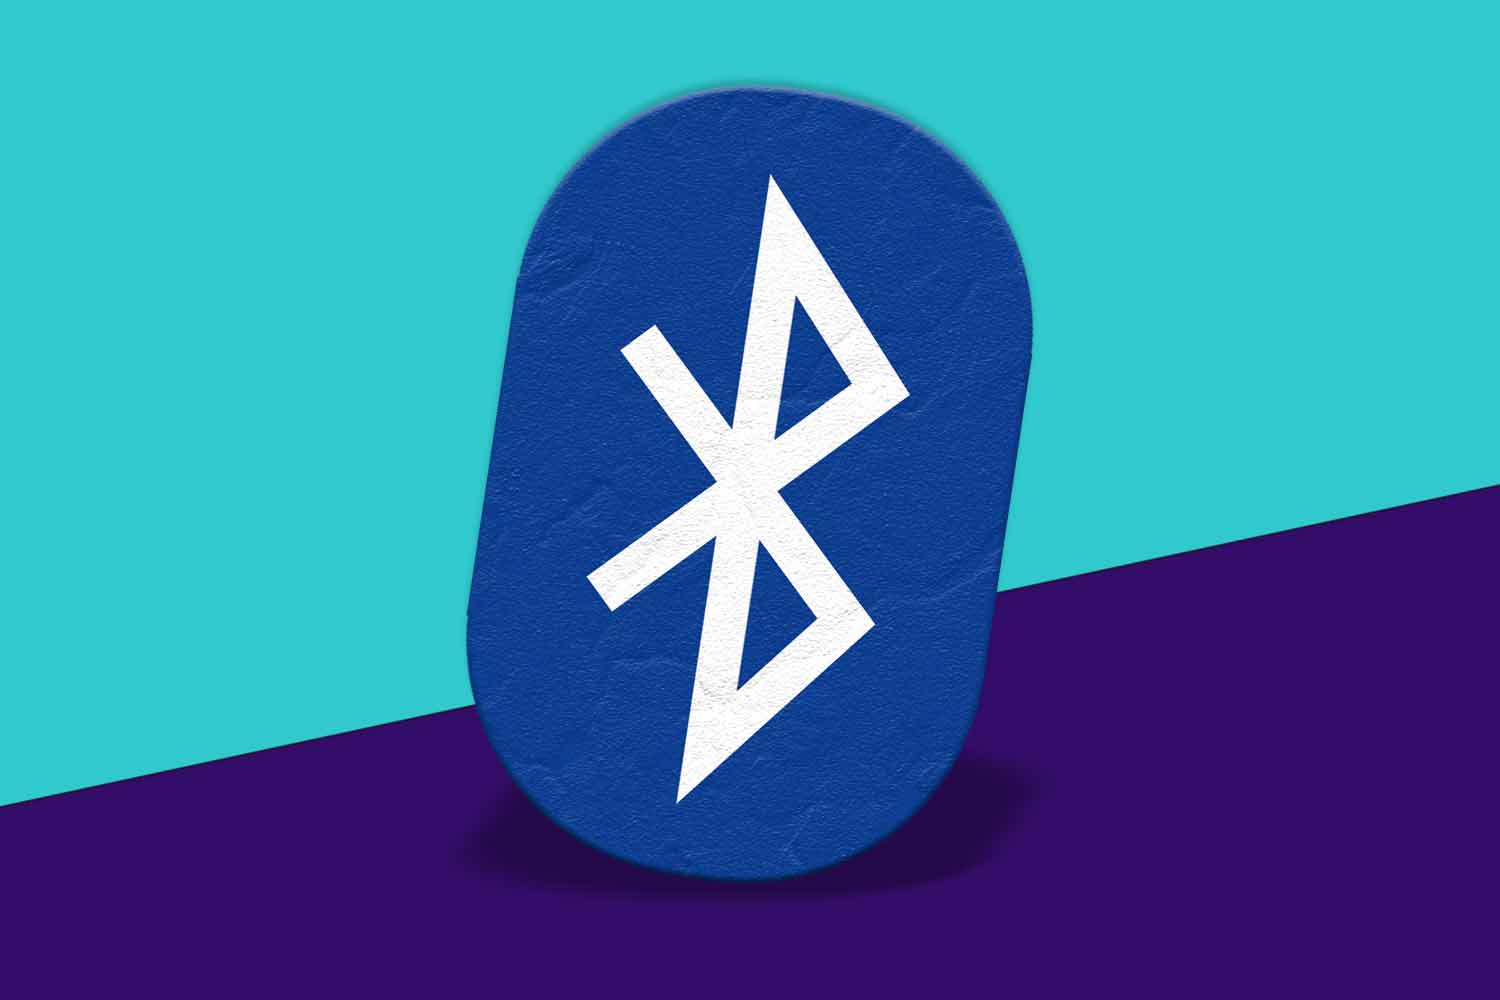 Multipoint Bluetooth explained: what is it, and how does it work?